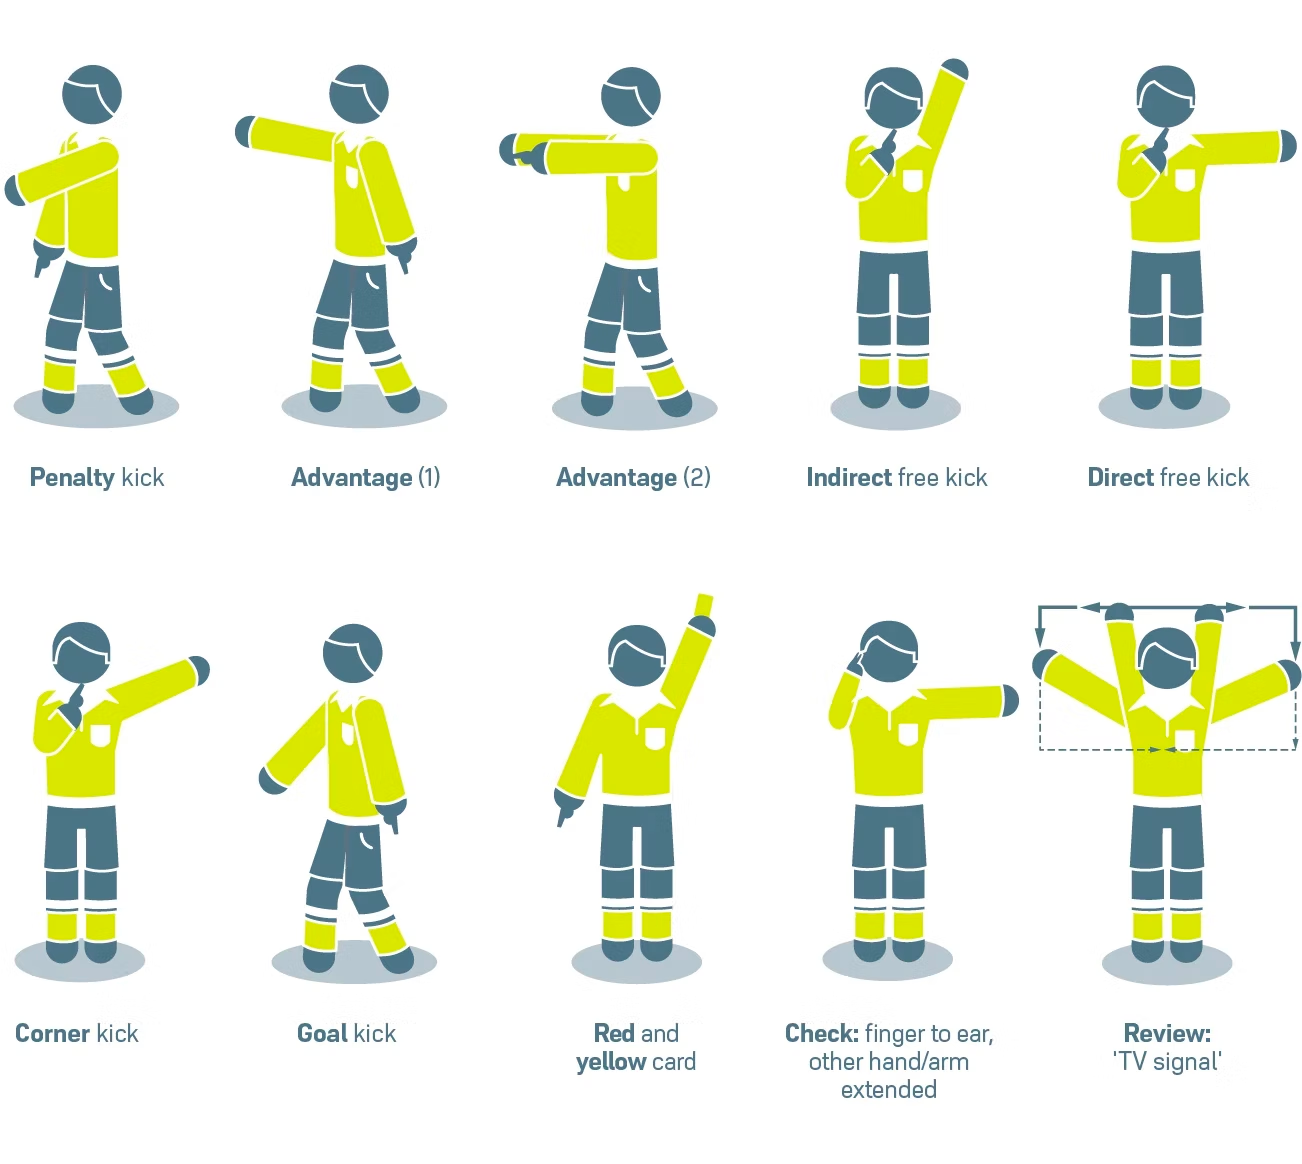 1654501124-ifab-referee-signals-cms-2.png